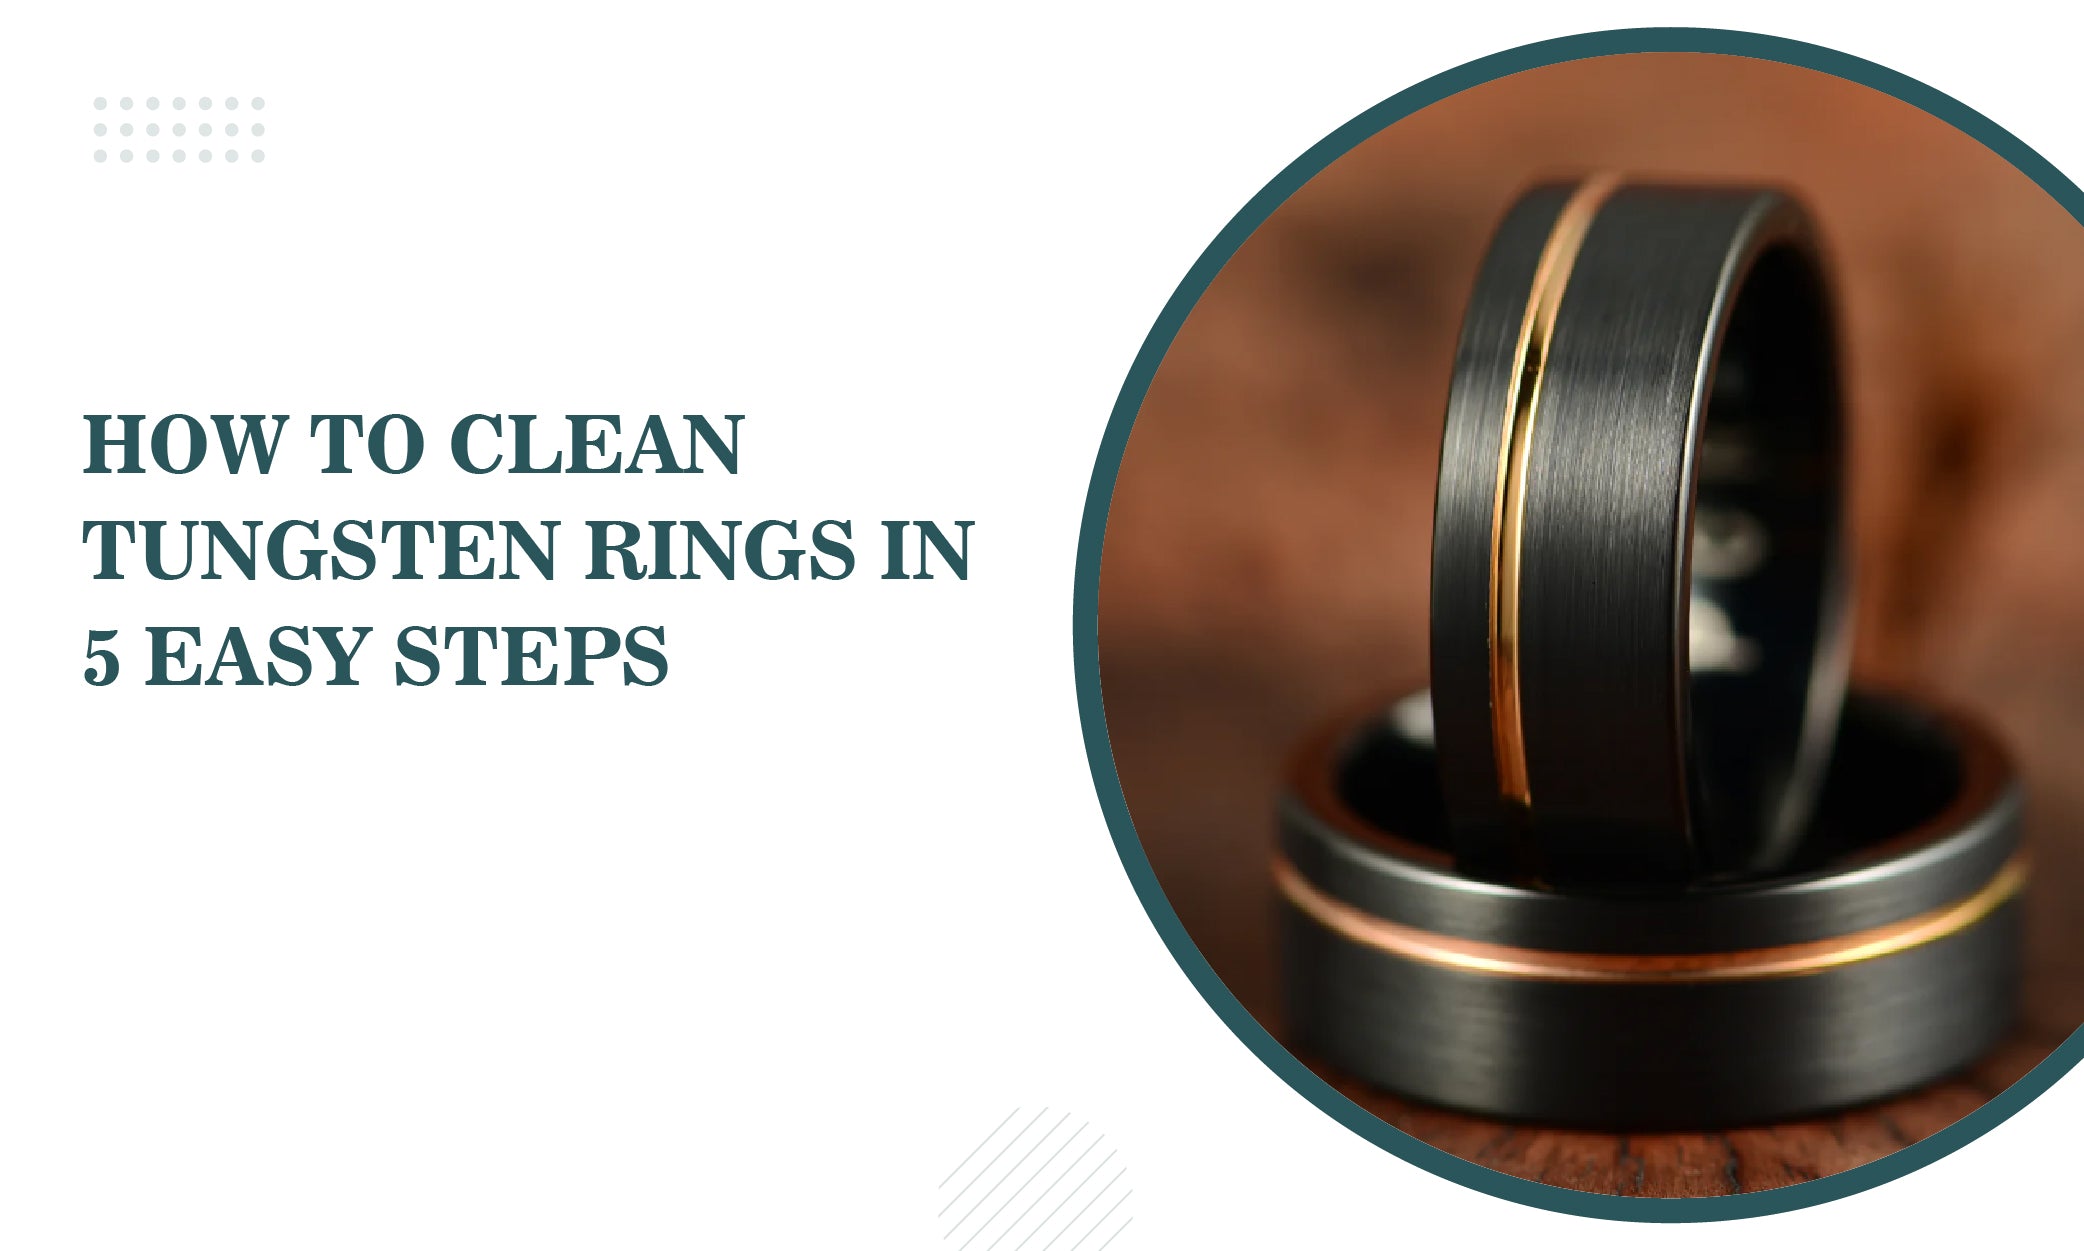 How To Clean Tungsten Rings In 5 Easy Steps